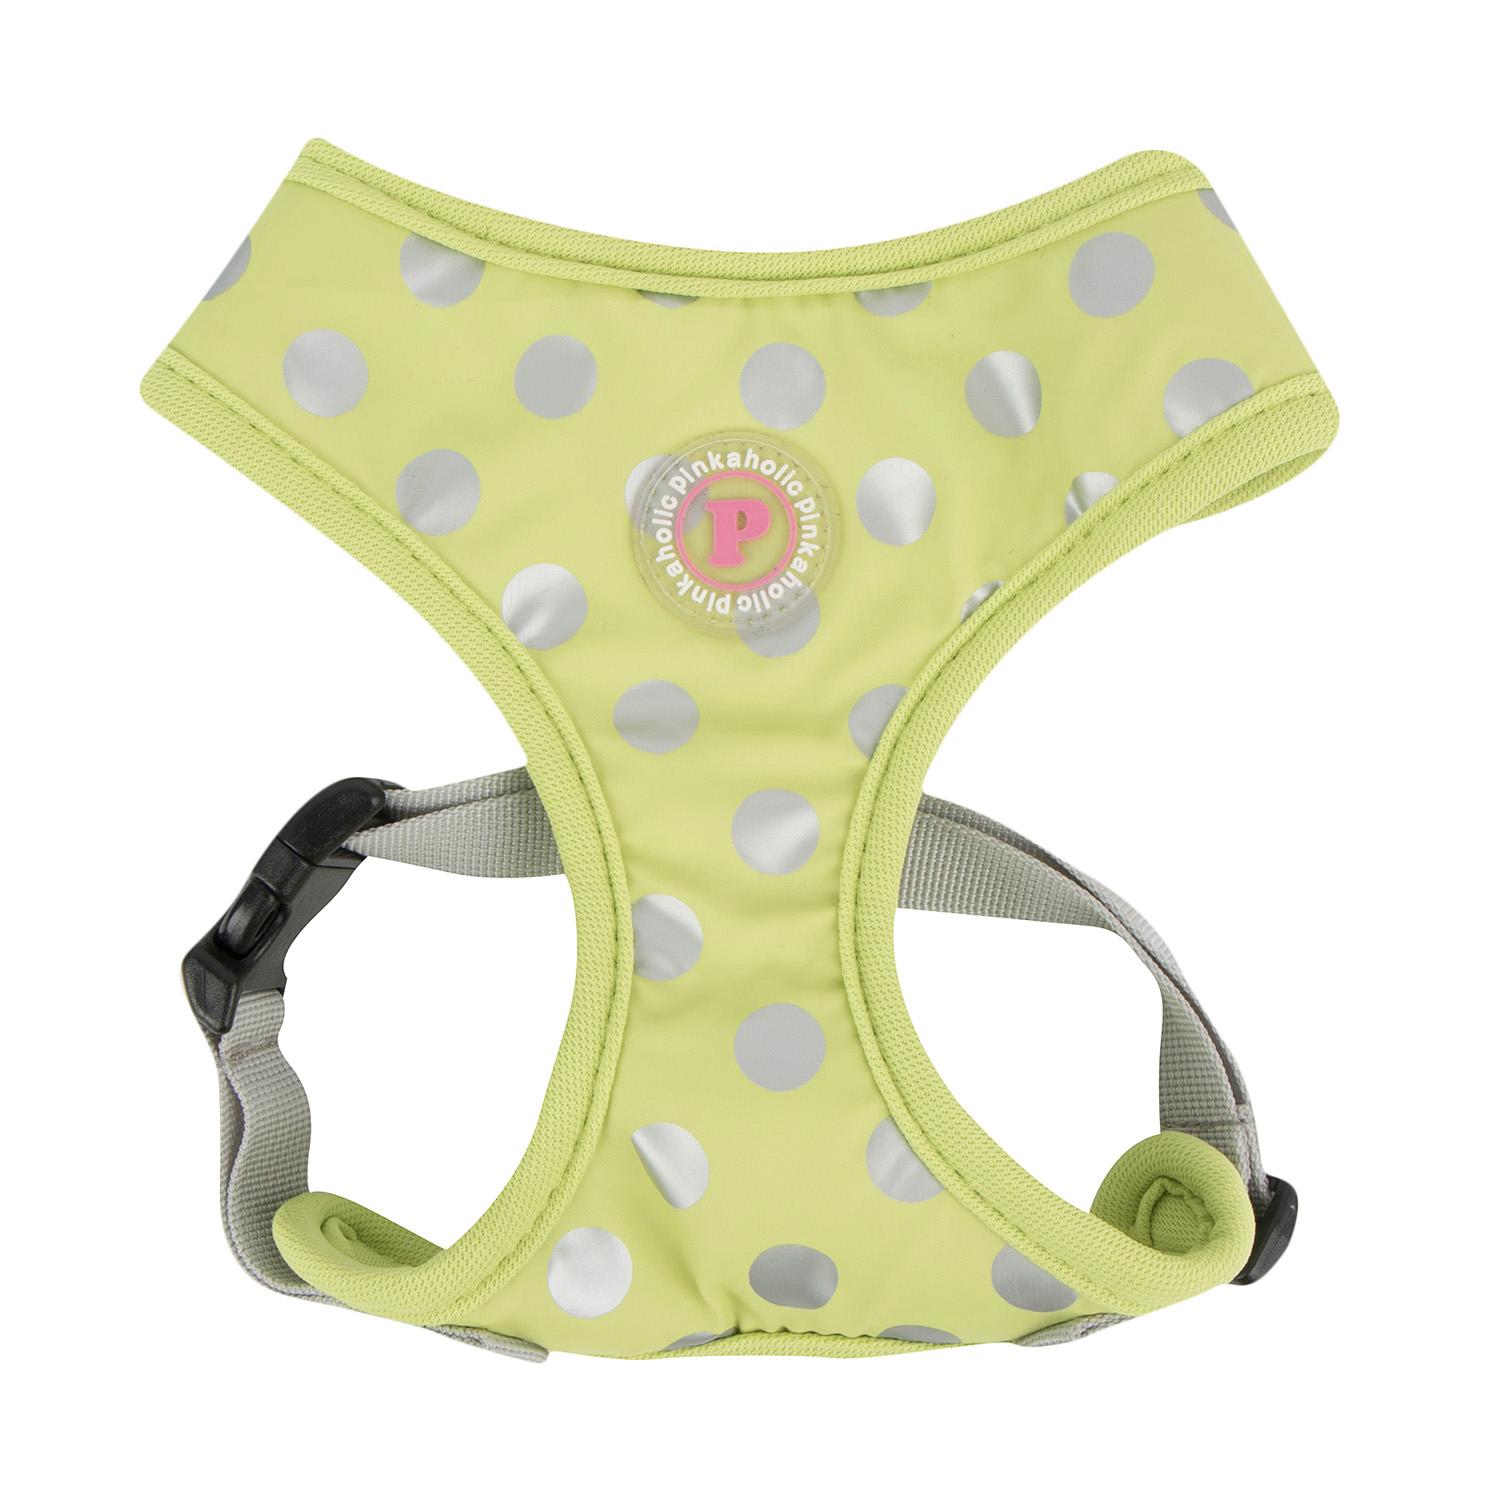 Chic Adjustable Dog Harness by Pinkaholic - Lime